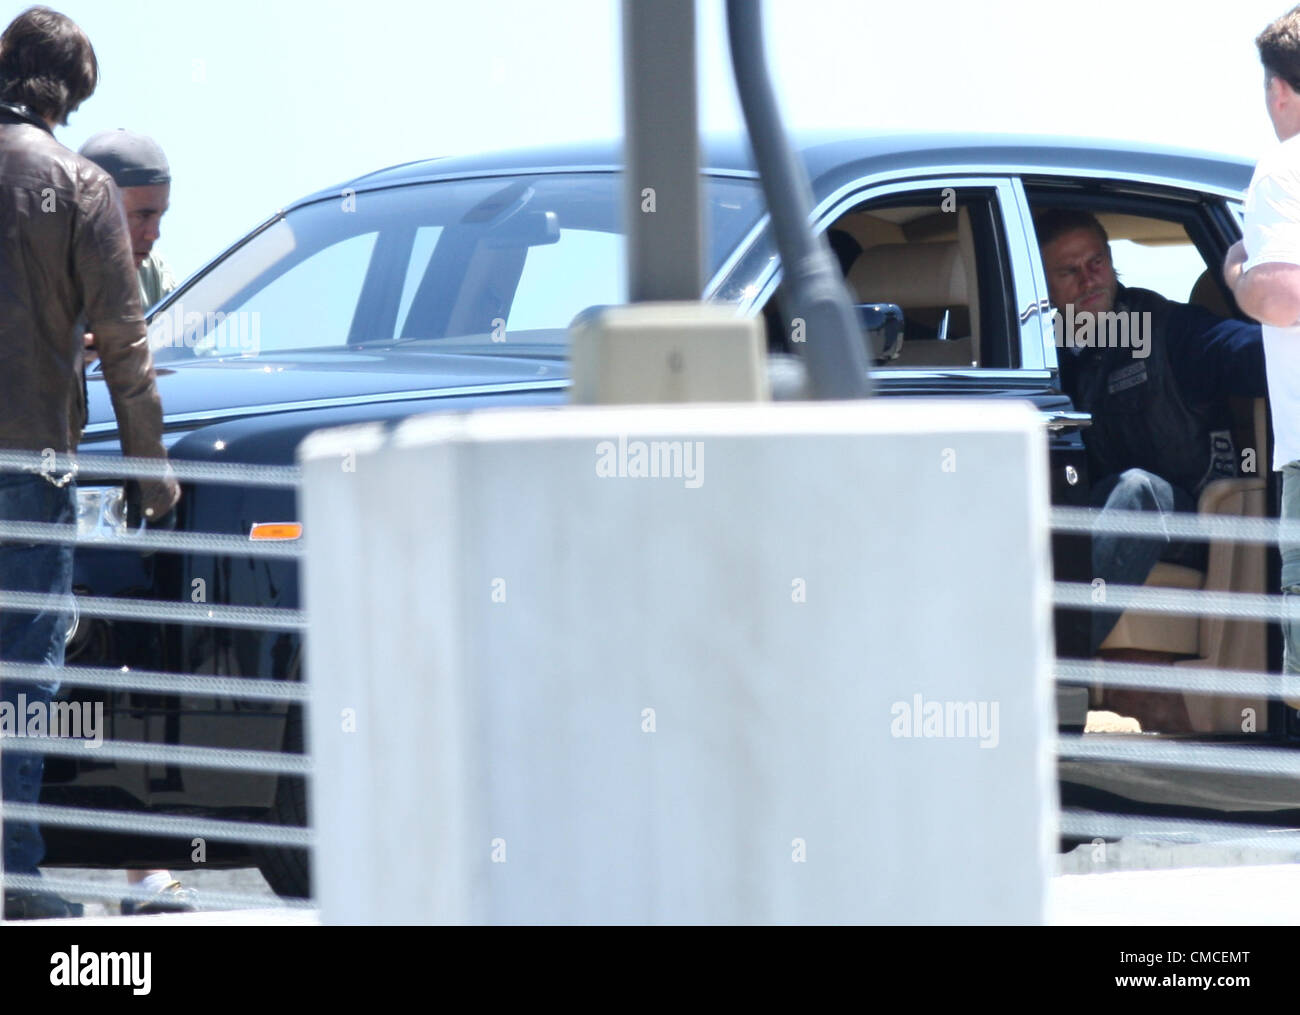 CHARLIE HUNNAM SONS OF ANARCHY. FILM SET LOS ANGELES CALIFORNIA USA 17 July 2012 Stock Photo